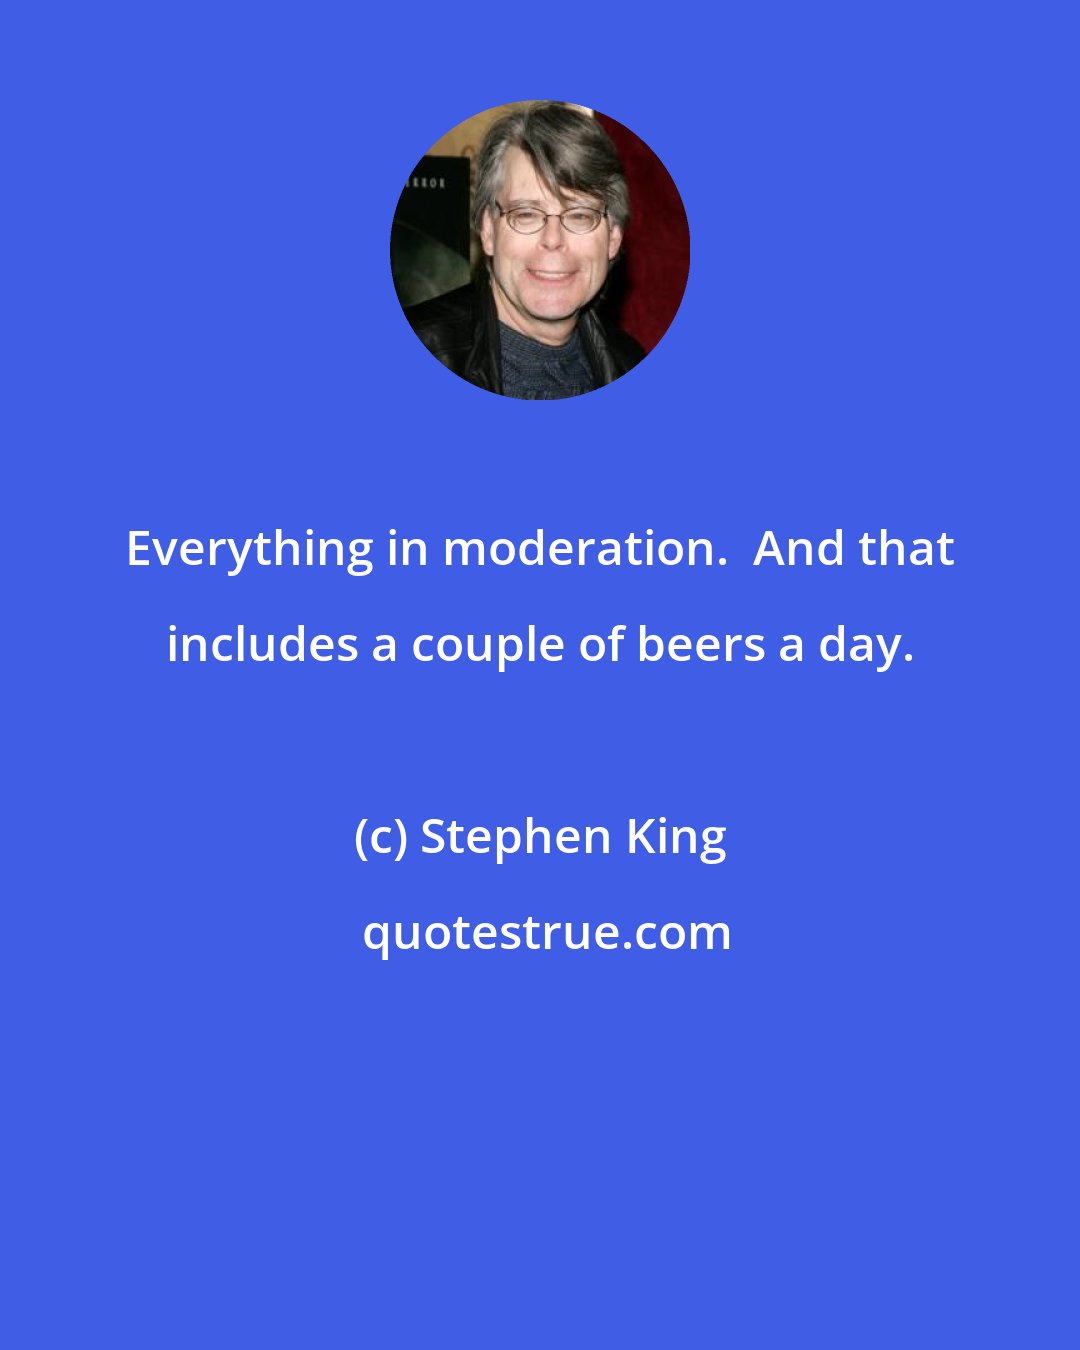 Stephen King: Everything in moderation.  And that includes a couple of beers a day.